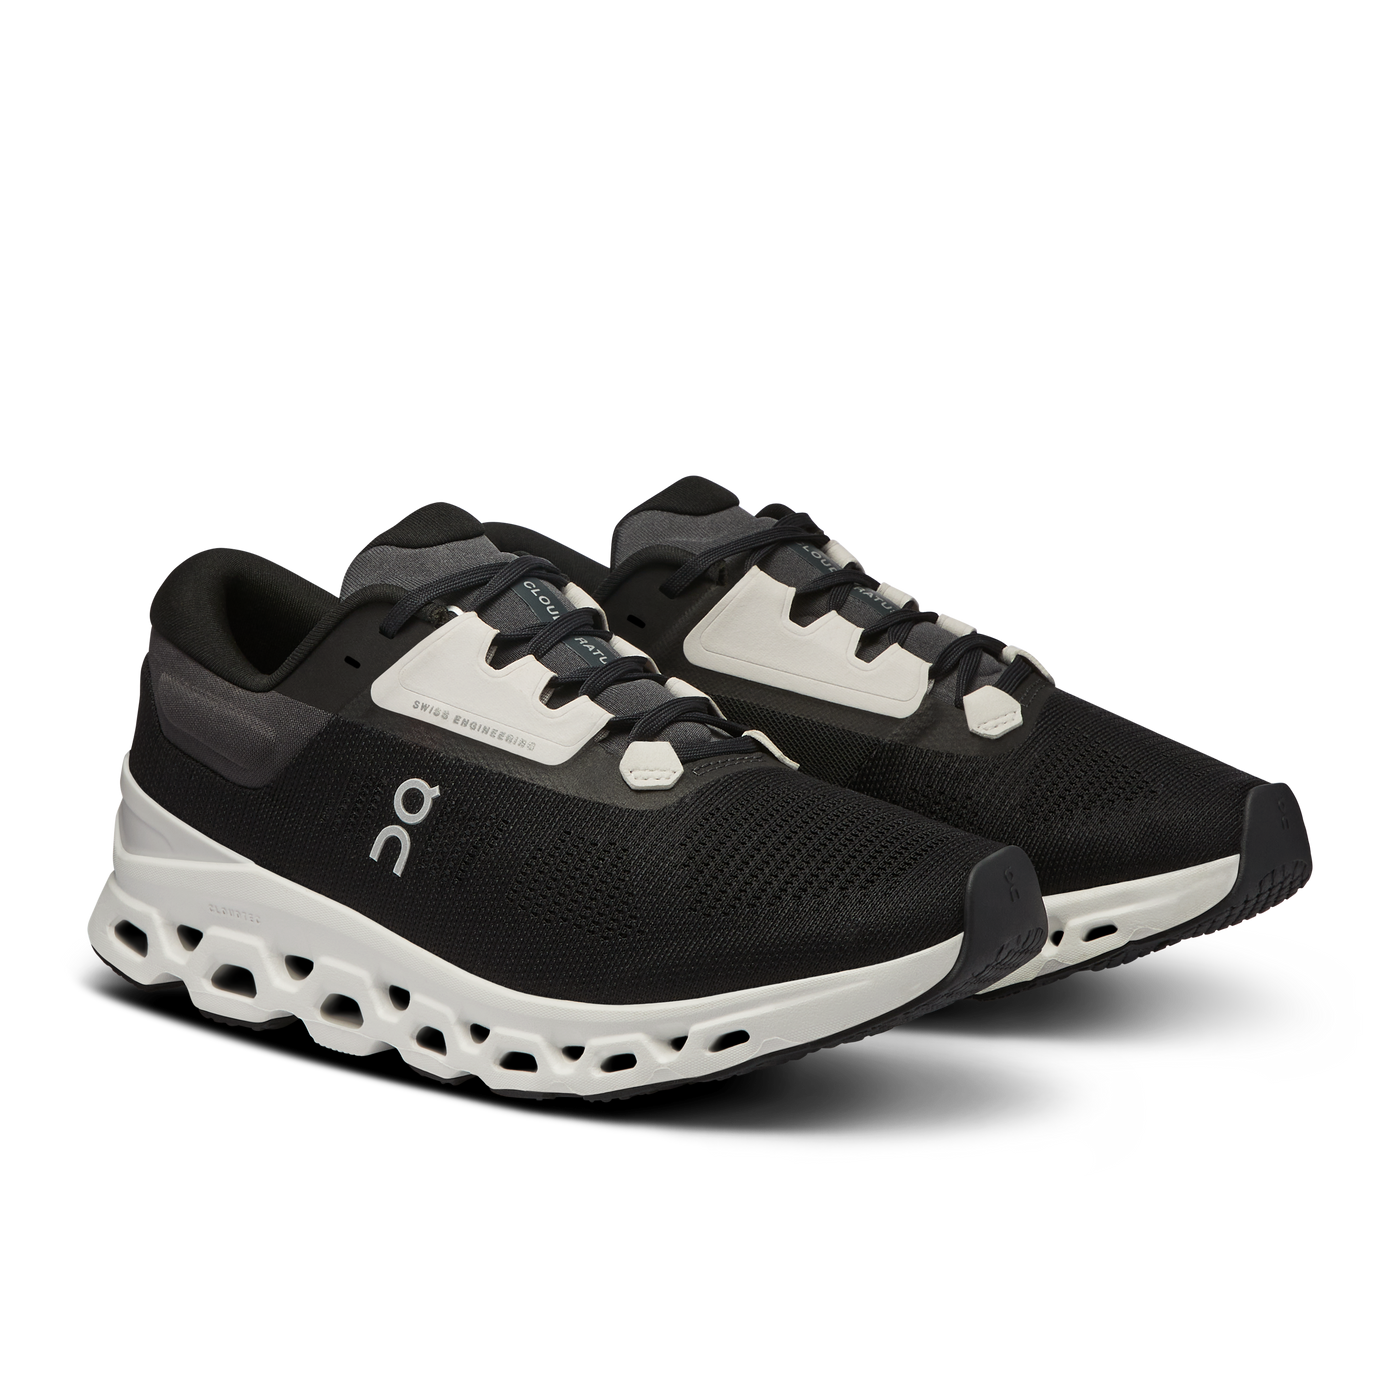 ON Womens Cloudstratus 3 - Black/Frost